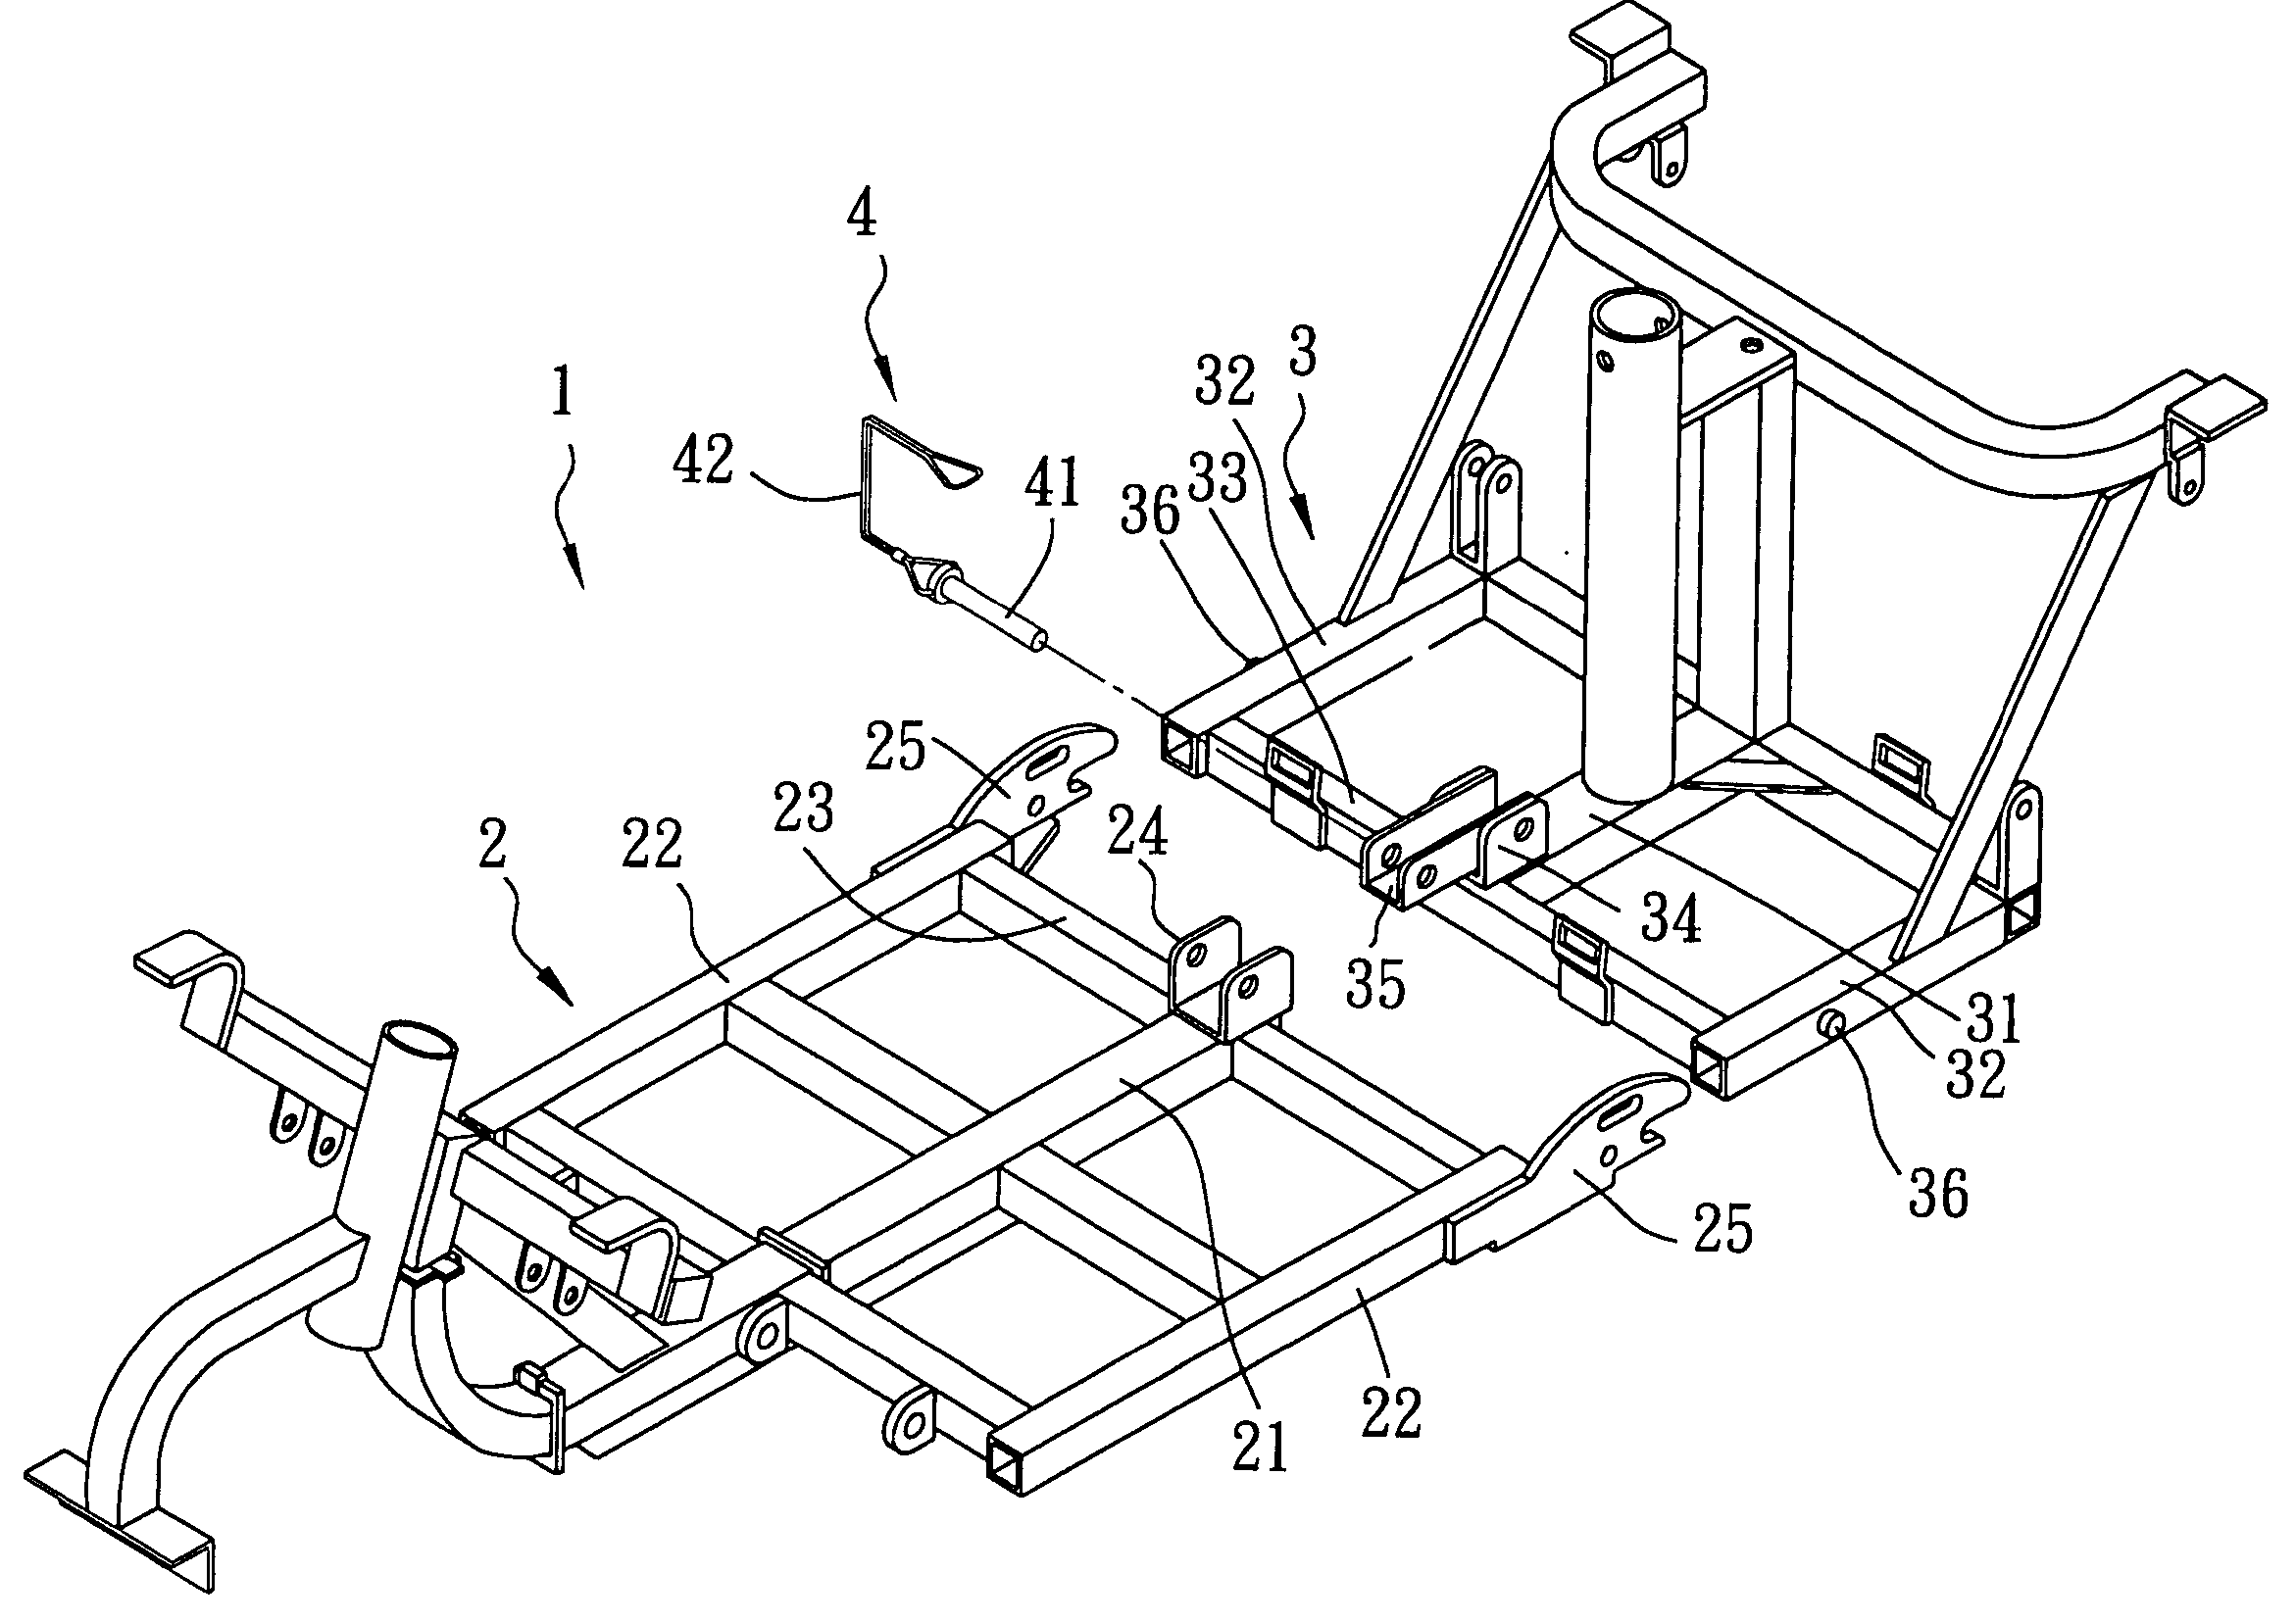 Vehicle chassis having a locking device for securing connection between first and second chassis members